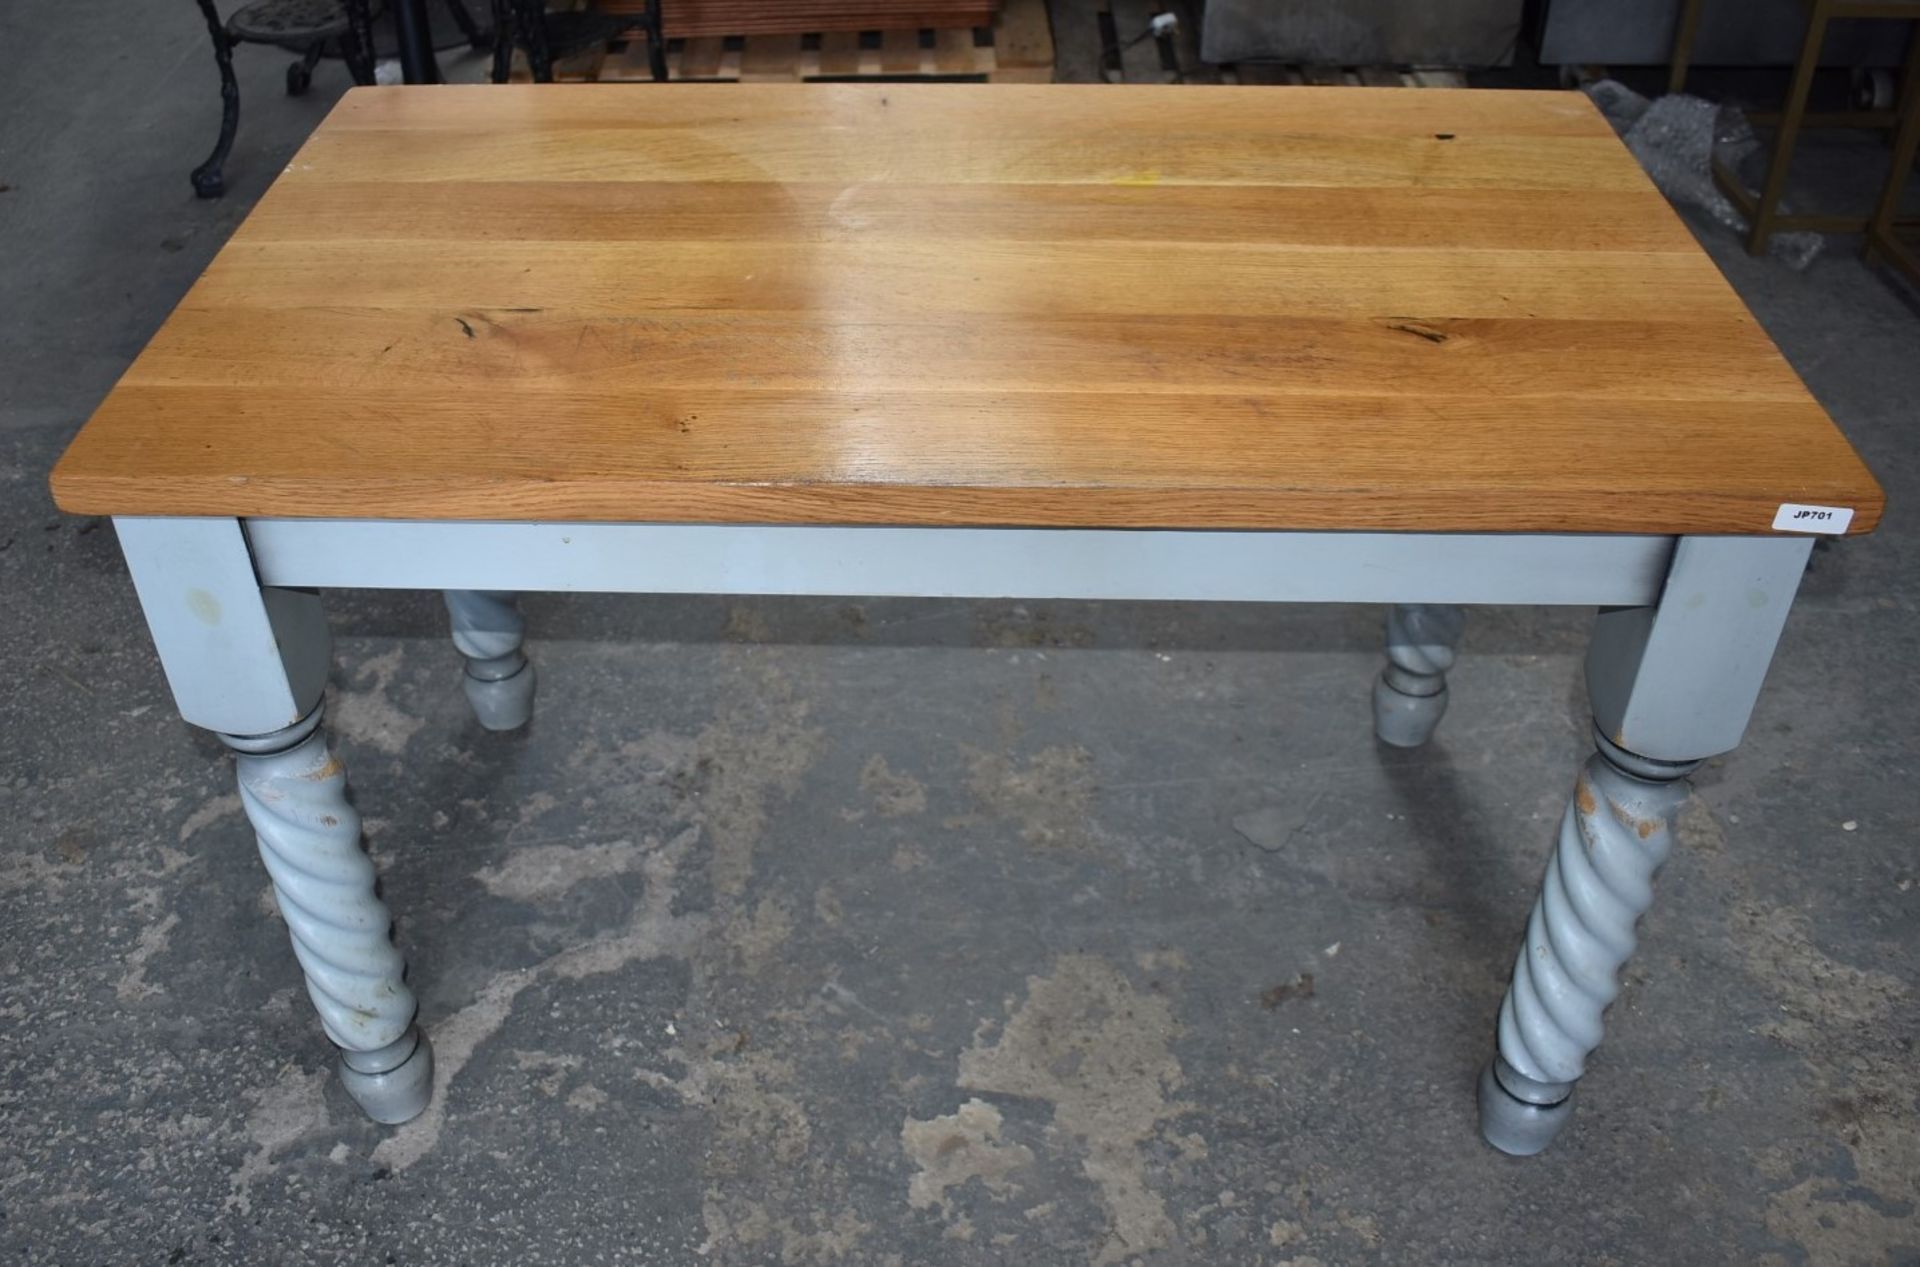 1 x Solid Wood Farmhouse Country Style Kitchen Dining Table With Barley Twist Legs and Two Tone - Image 3 of 6